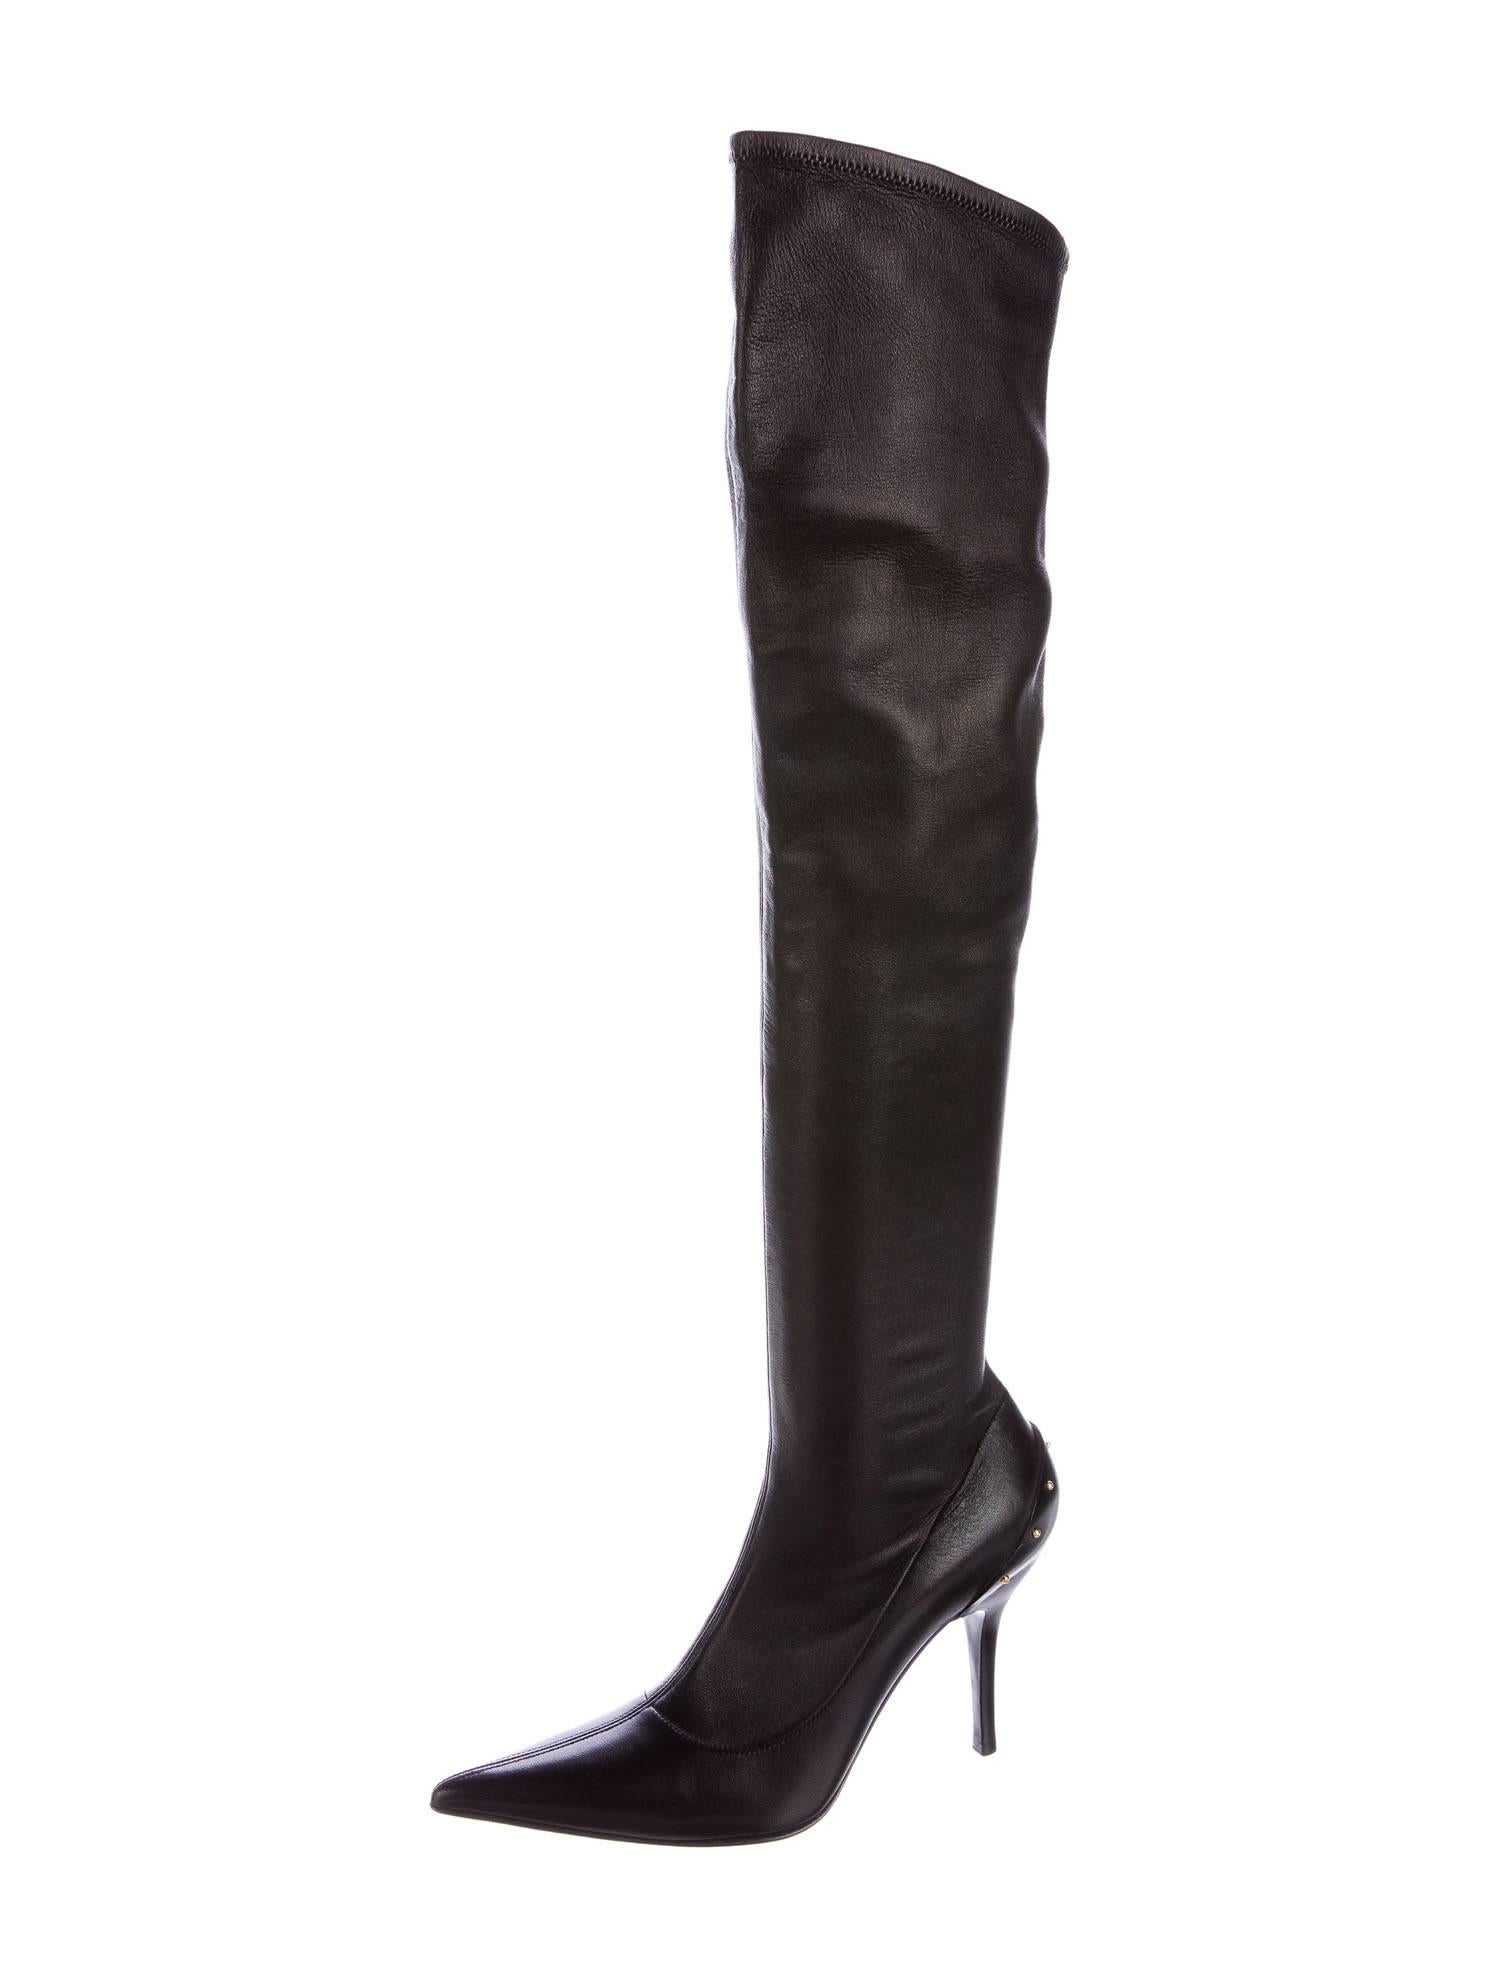 Tom Ford for Gucci Over-the-Knee Leather Boots
Designer size - 7 1/2 ( European size 37.5 )
F/W 2003 Collection
Black leather Gucci pointed-toe over-the-knee boots with gold-tone stud embellishments at covered heels and zip closure at sides.
Calf